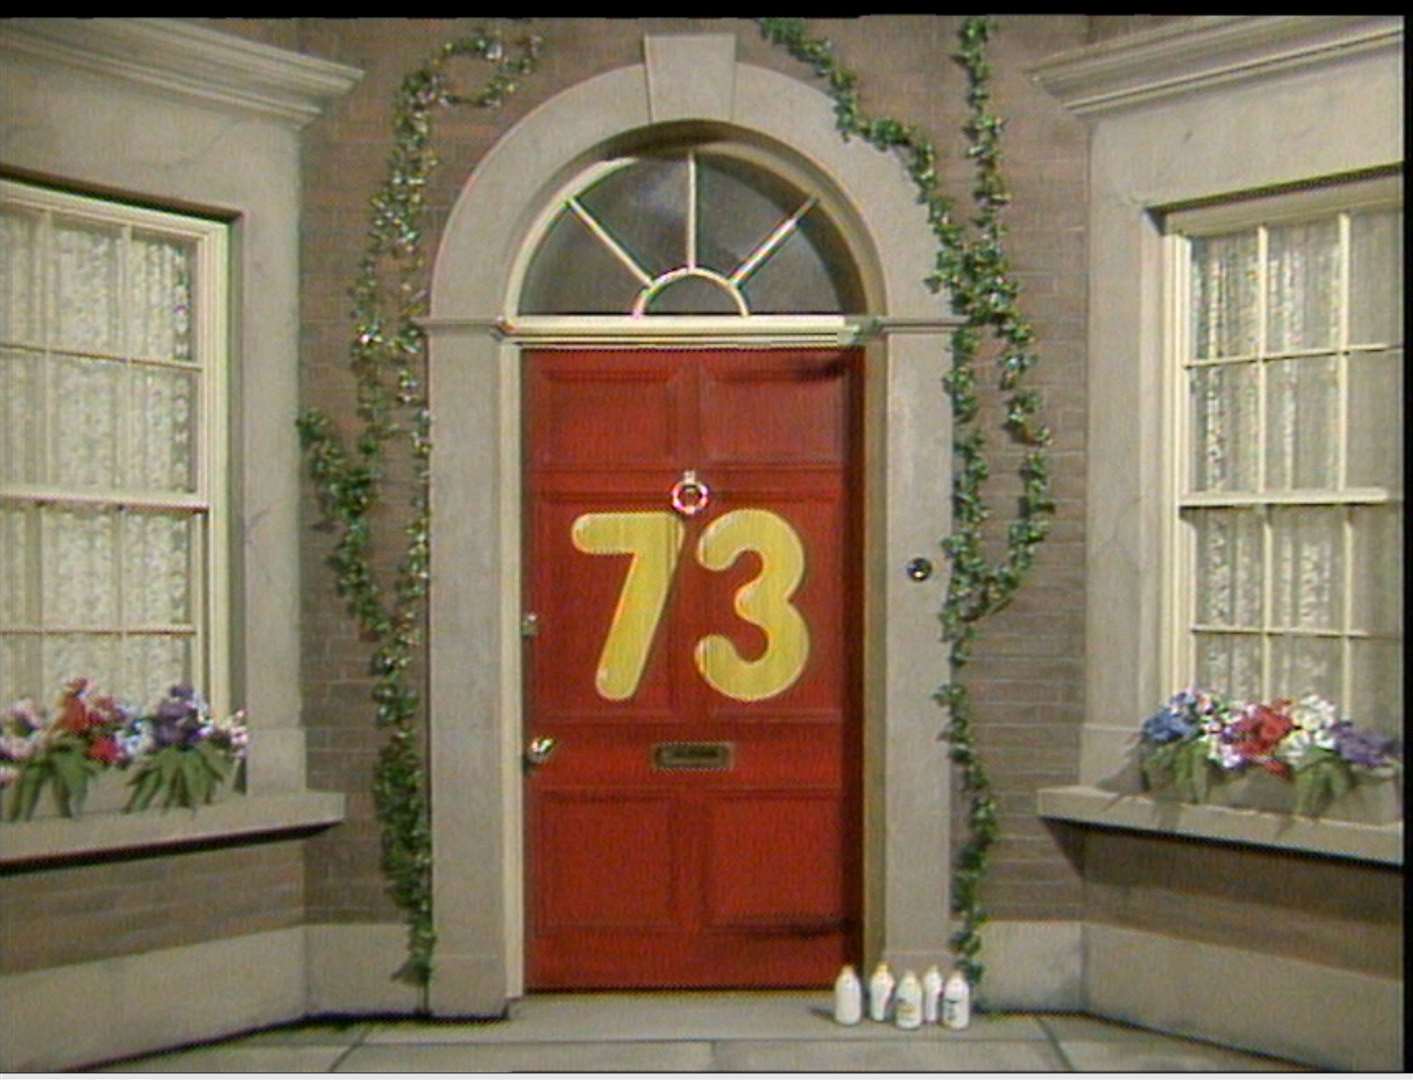 The front door of Saturday morning children's show Number 73 made by TVS at Vinters Park studios, Maidstone